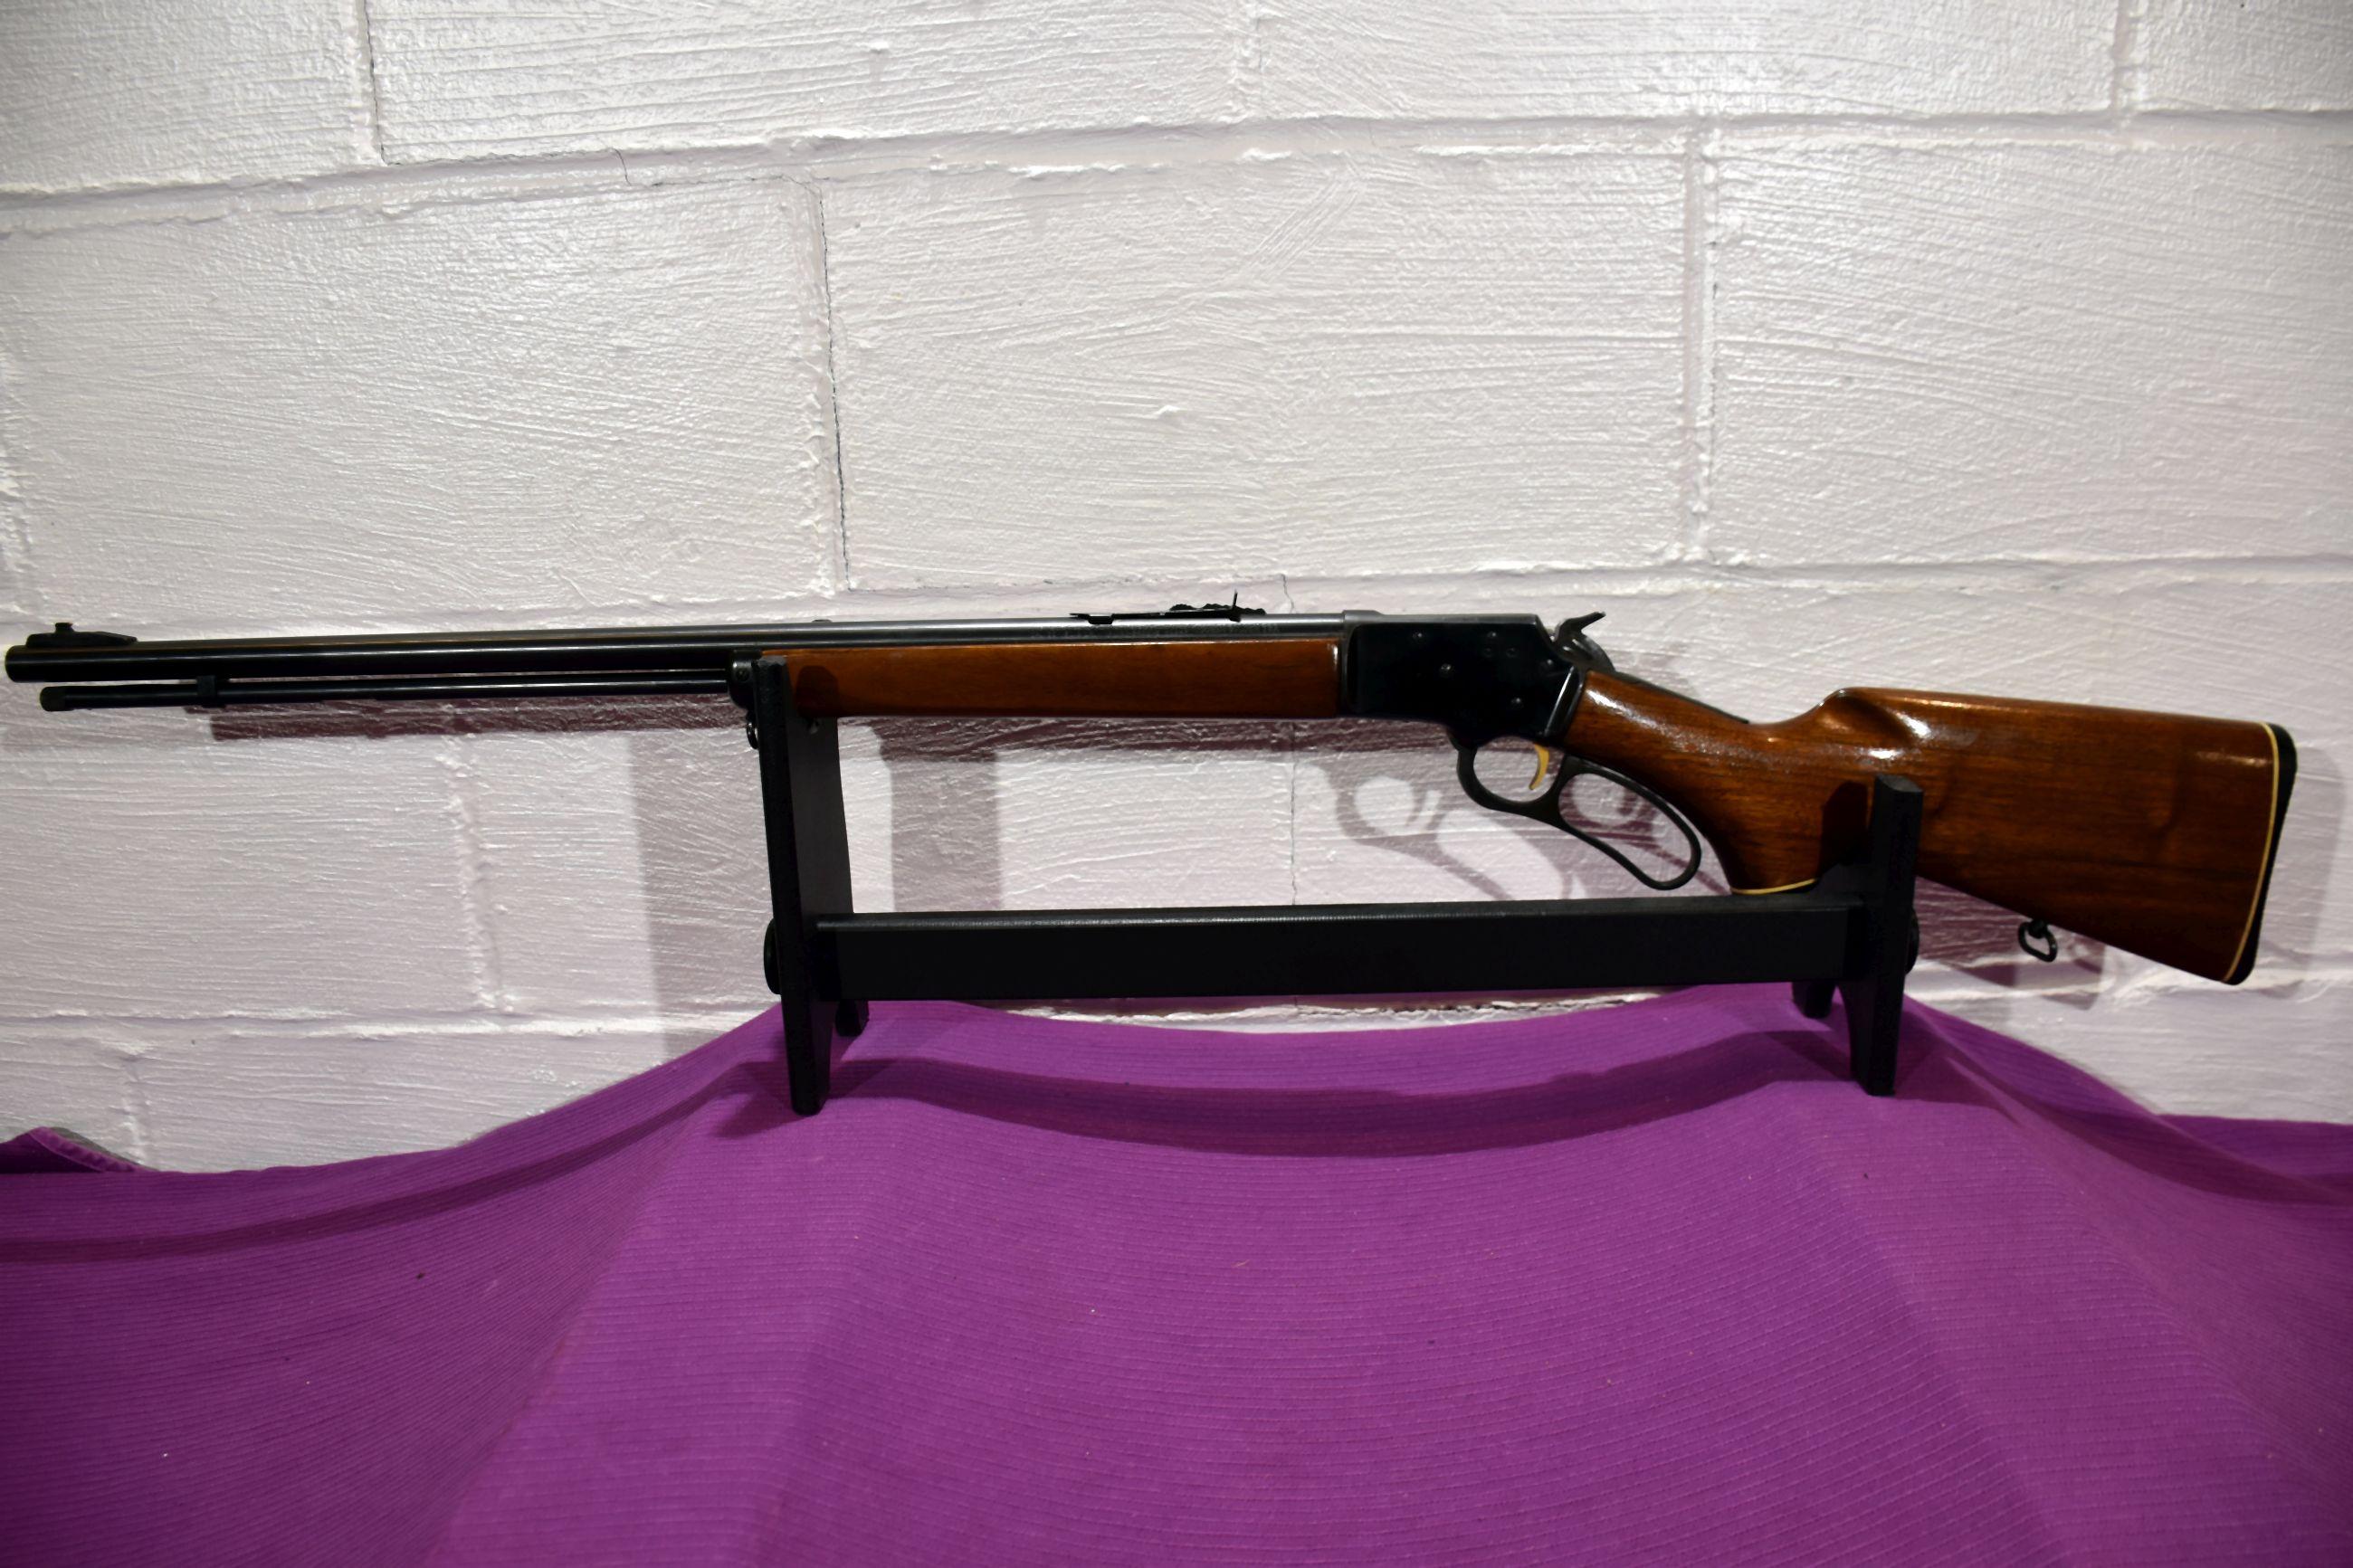 Marlin Golden 39A Lever Action Rifle, 22 SL or LR Microgroove Barrel, SN: 68105270